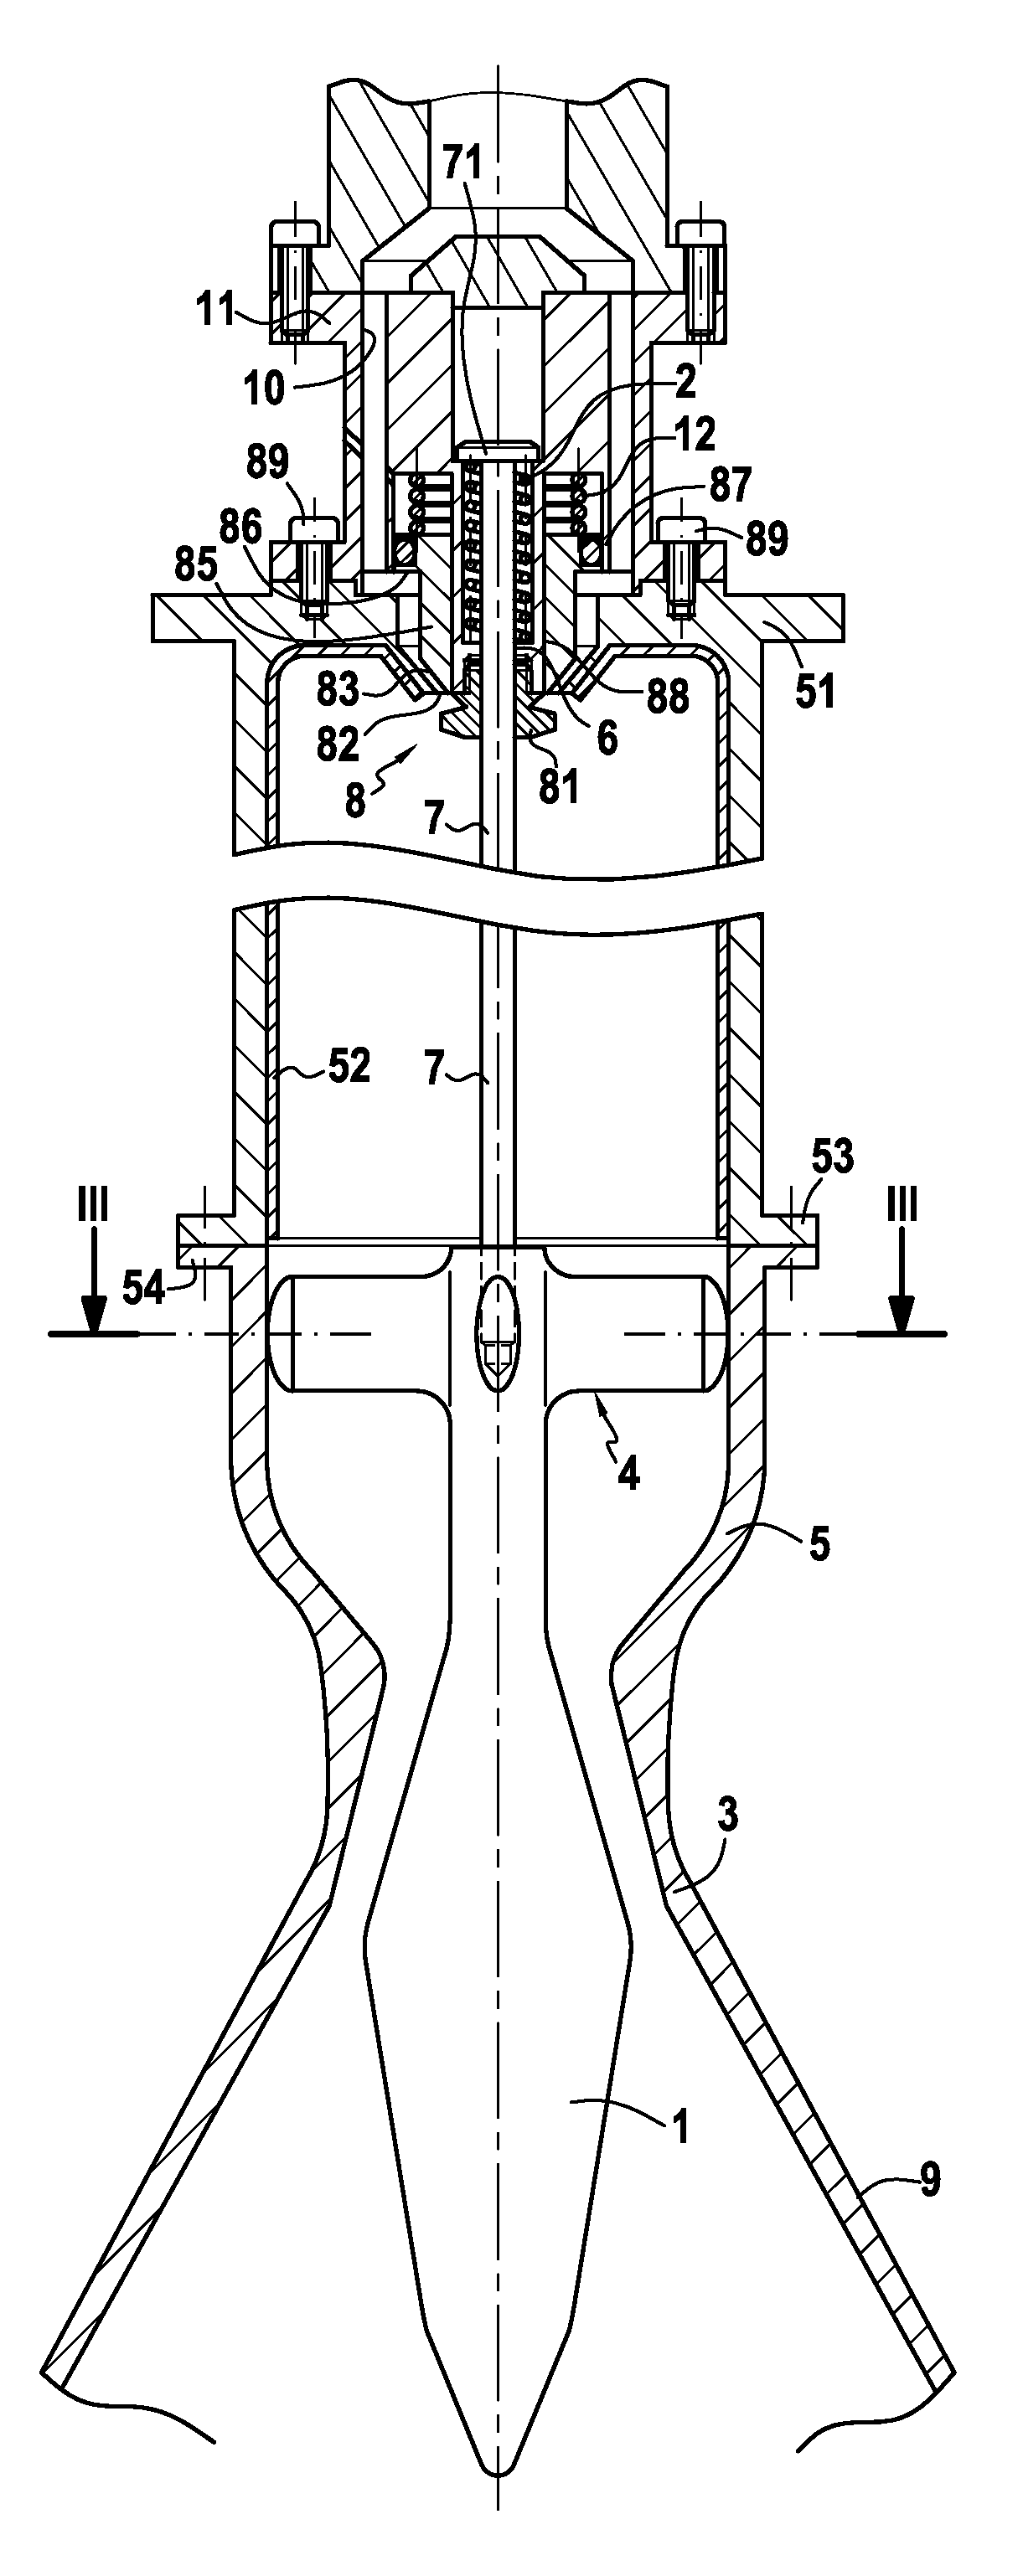 Liquid propellant rocket engine with a propulsion chamber shutter